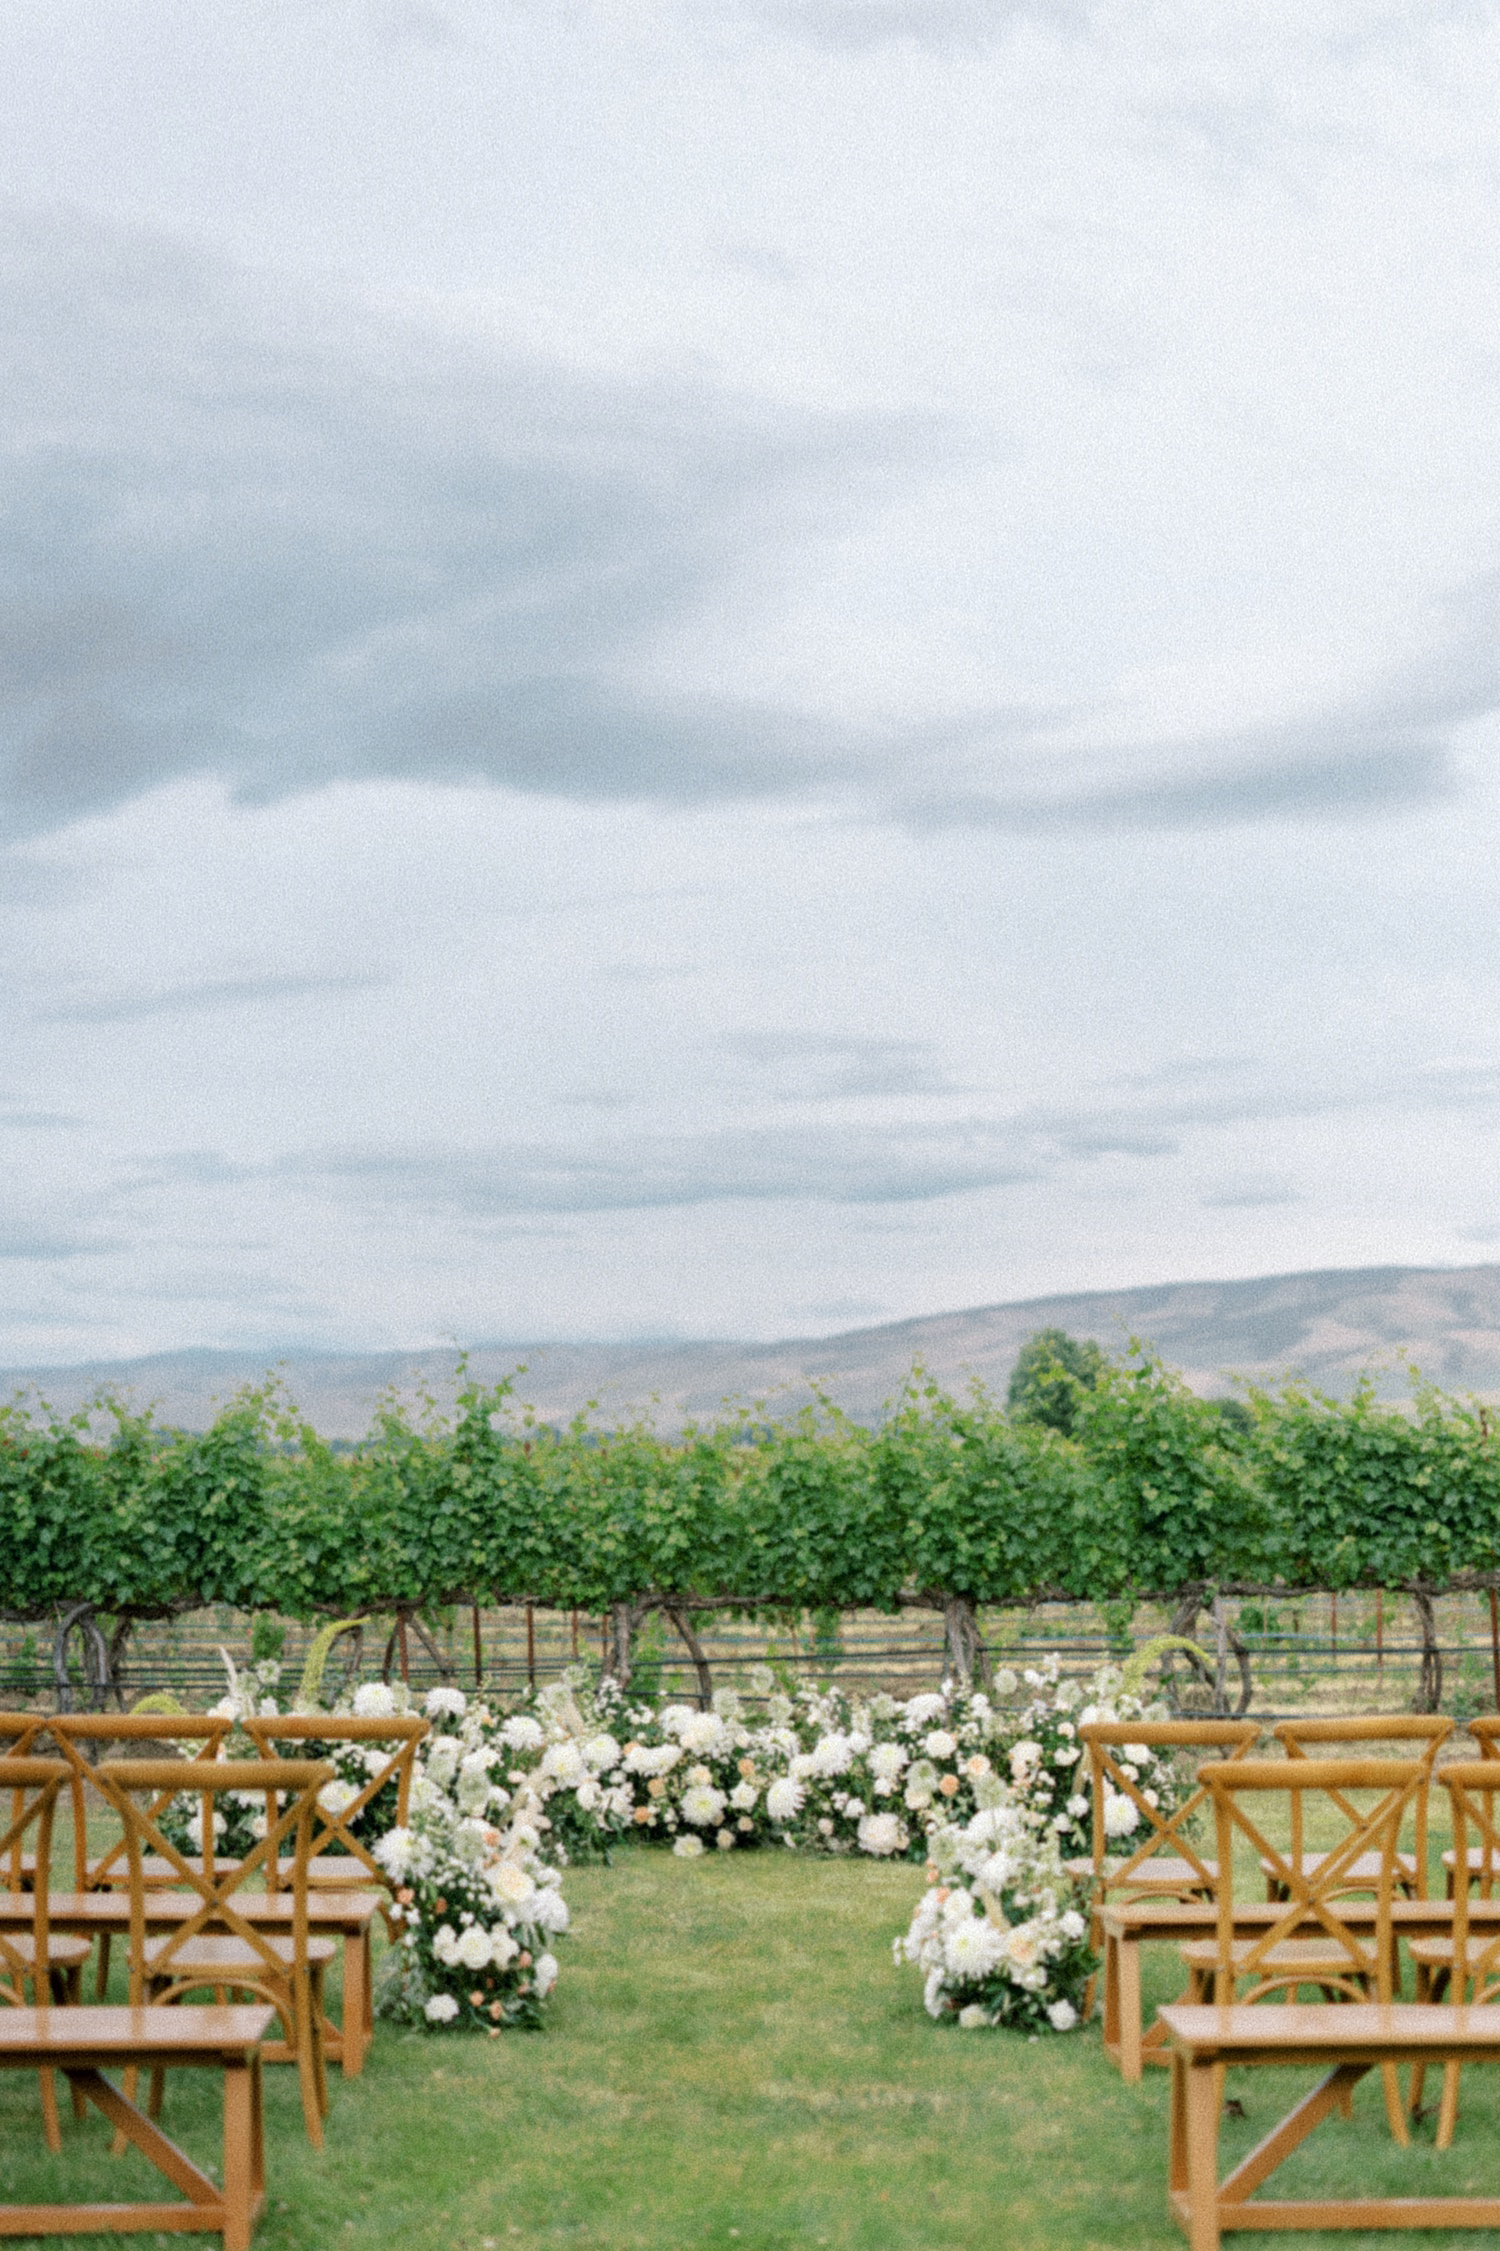 Ceremony decor for Kinhaven Winery Wedding